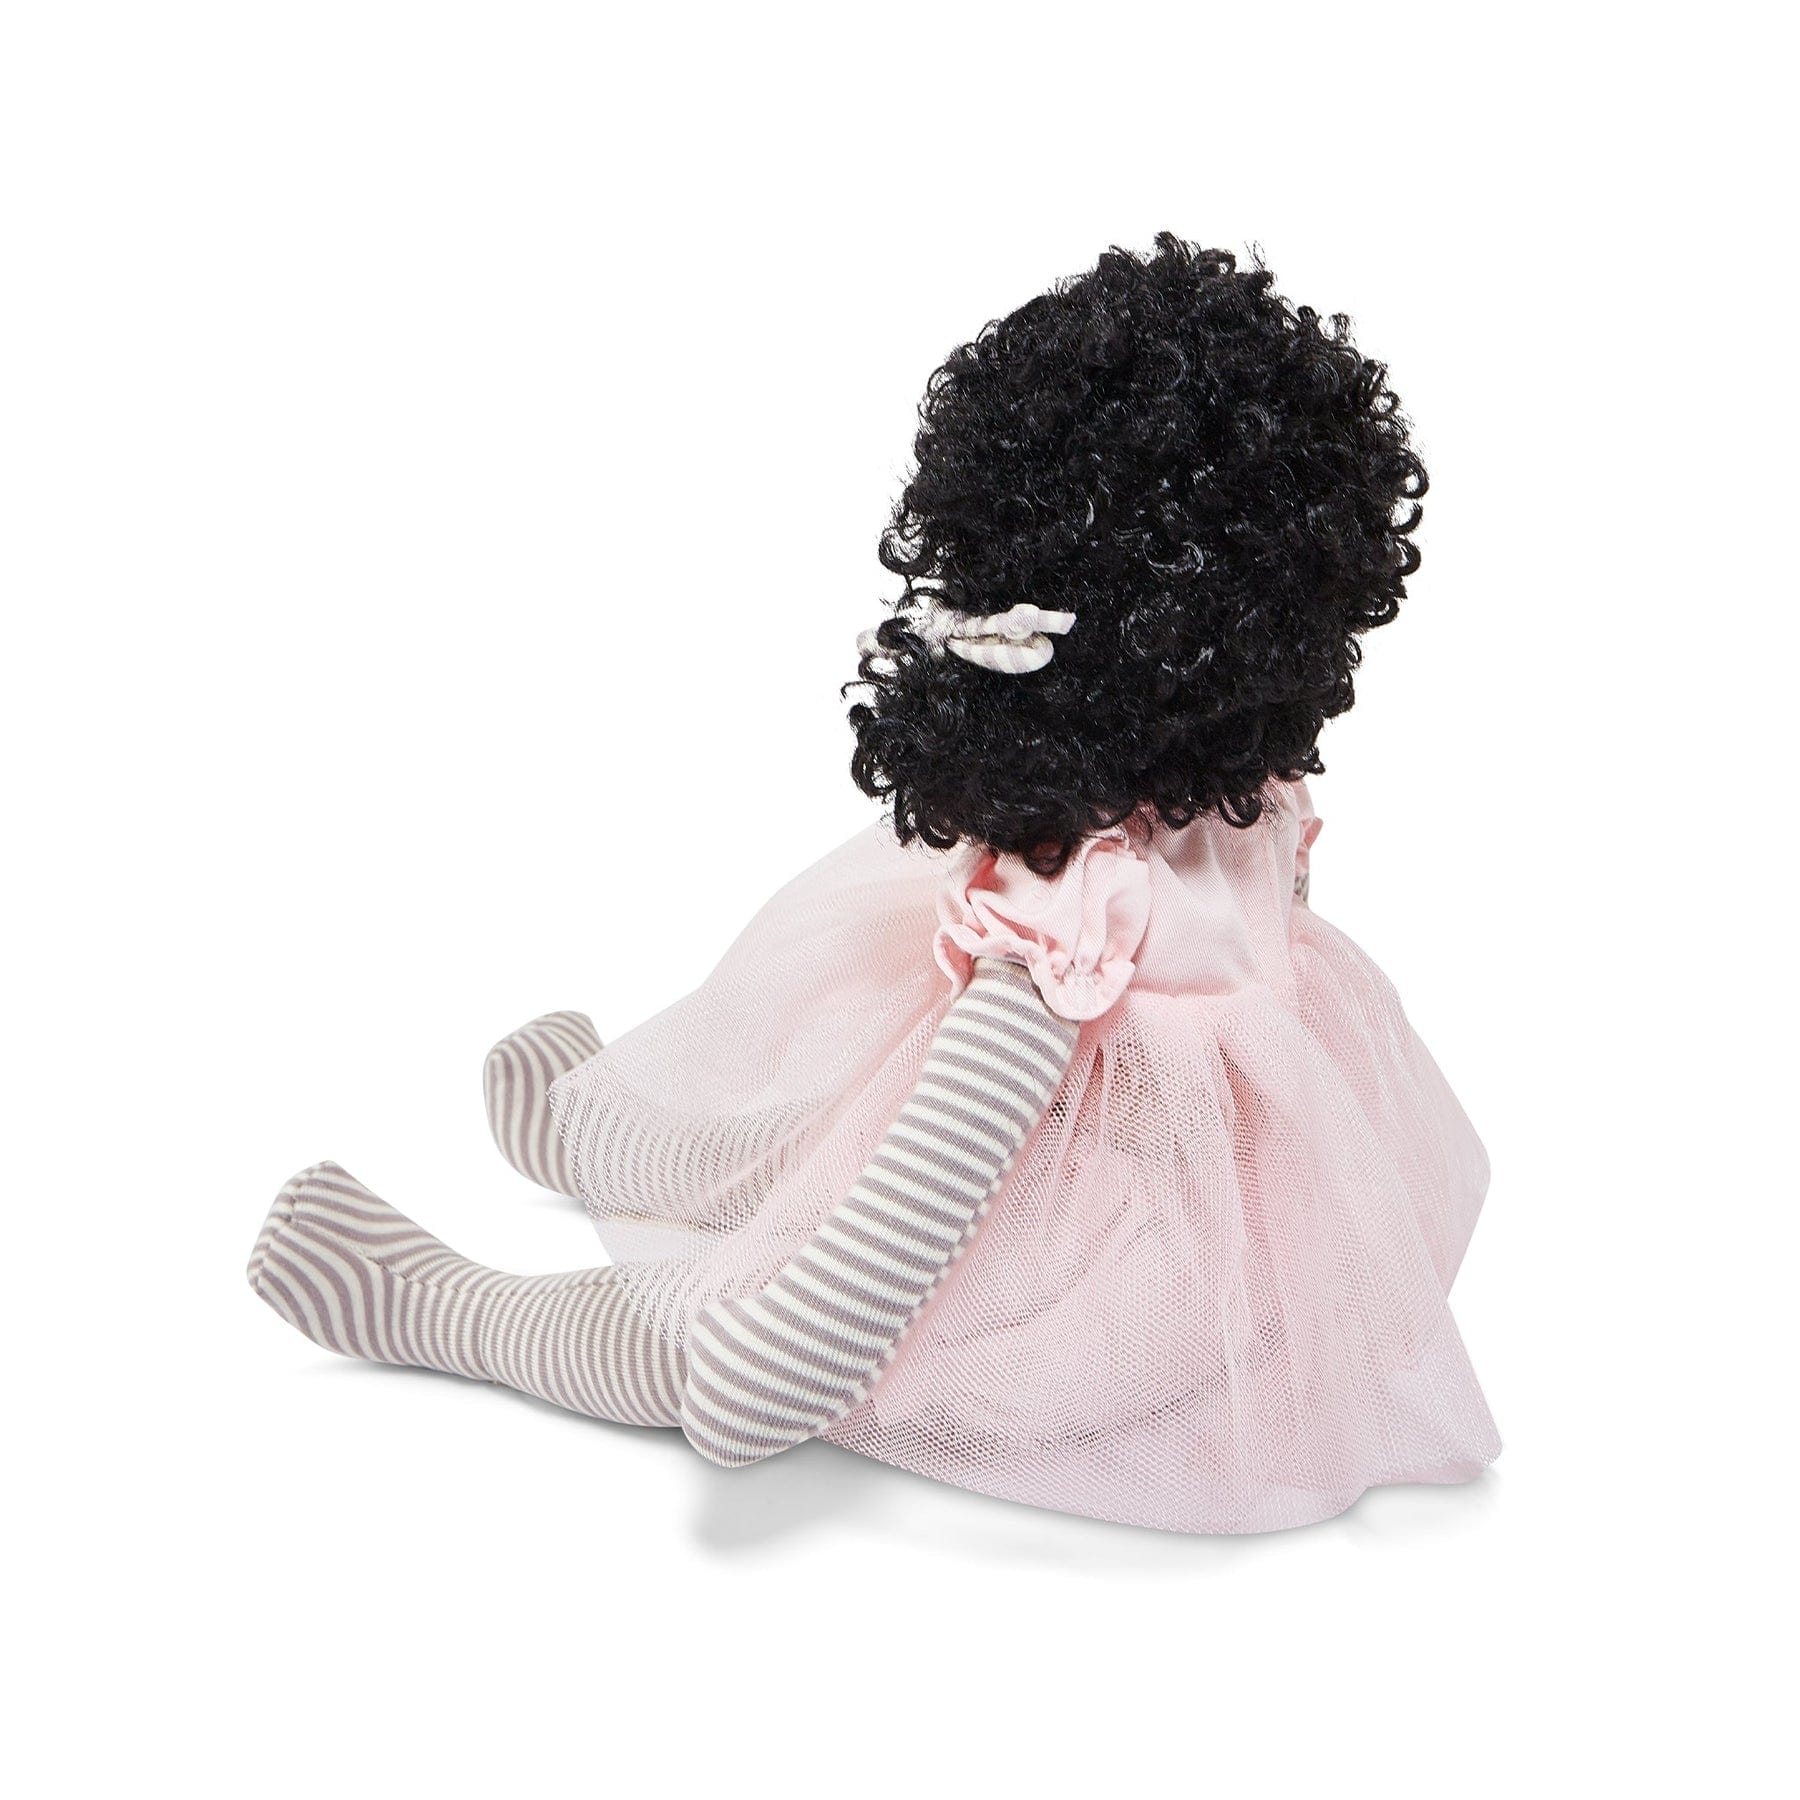 Bunnies By The Bay Bunnies By The Bay Elsie Black Hair Pretty Girl Plush Doll - Little Miss Muffin Children & Home